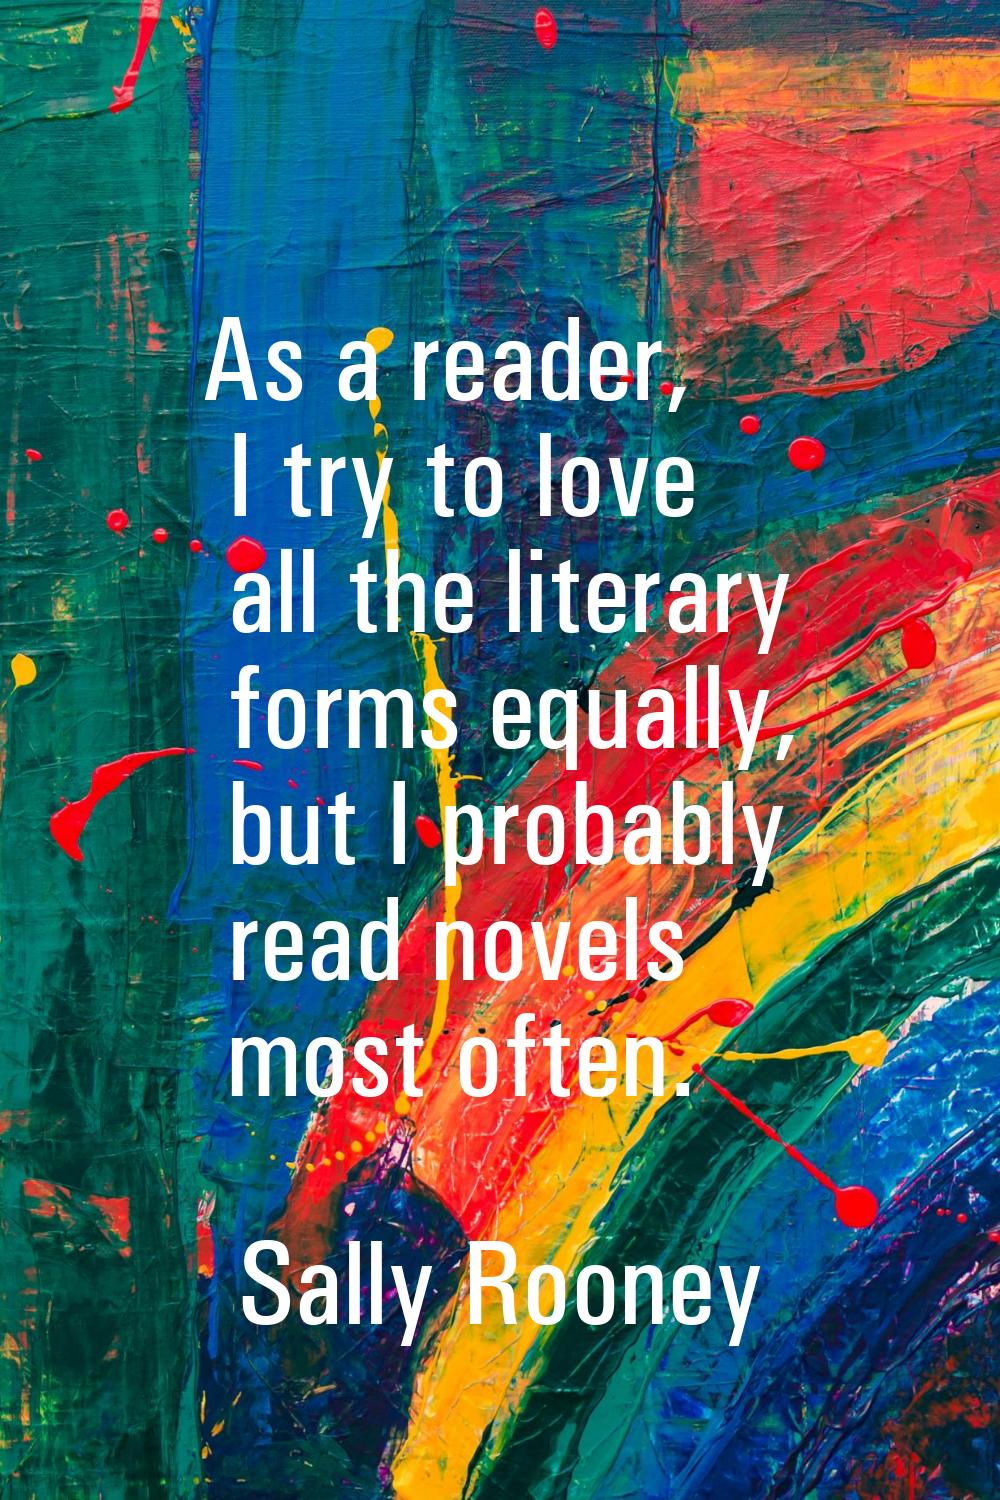 As a reader, I try to love all the literary forms equally, but I probably read novels most often.